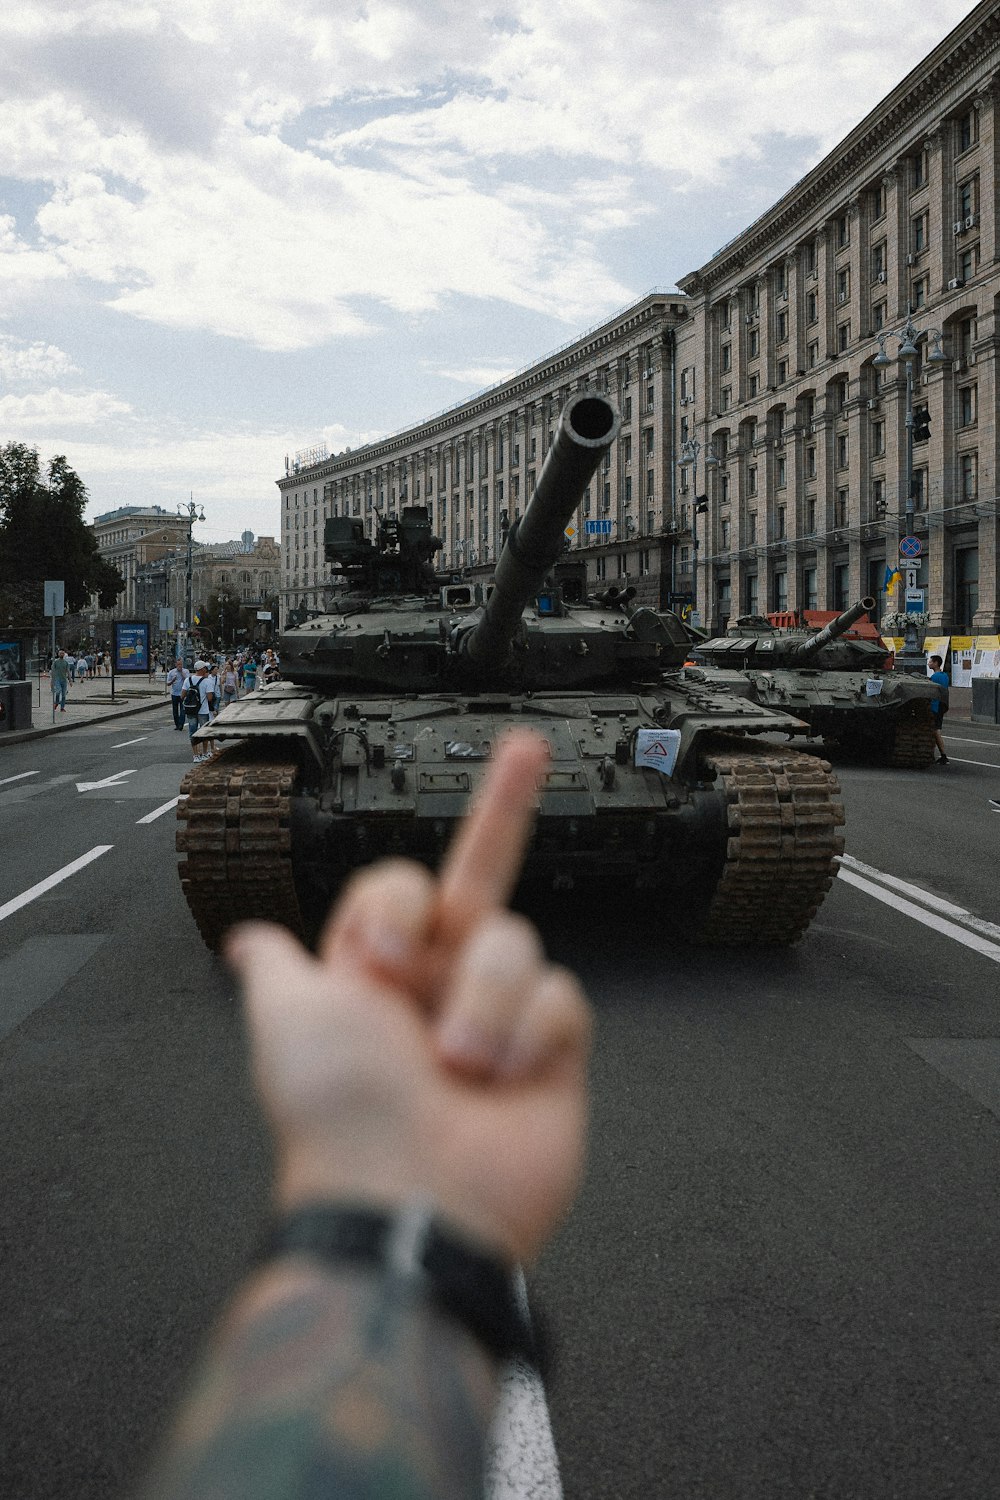 a hand with a gun in front of a military tank on a street